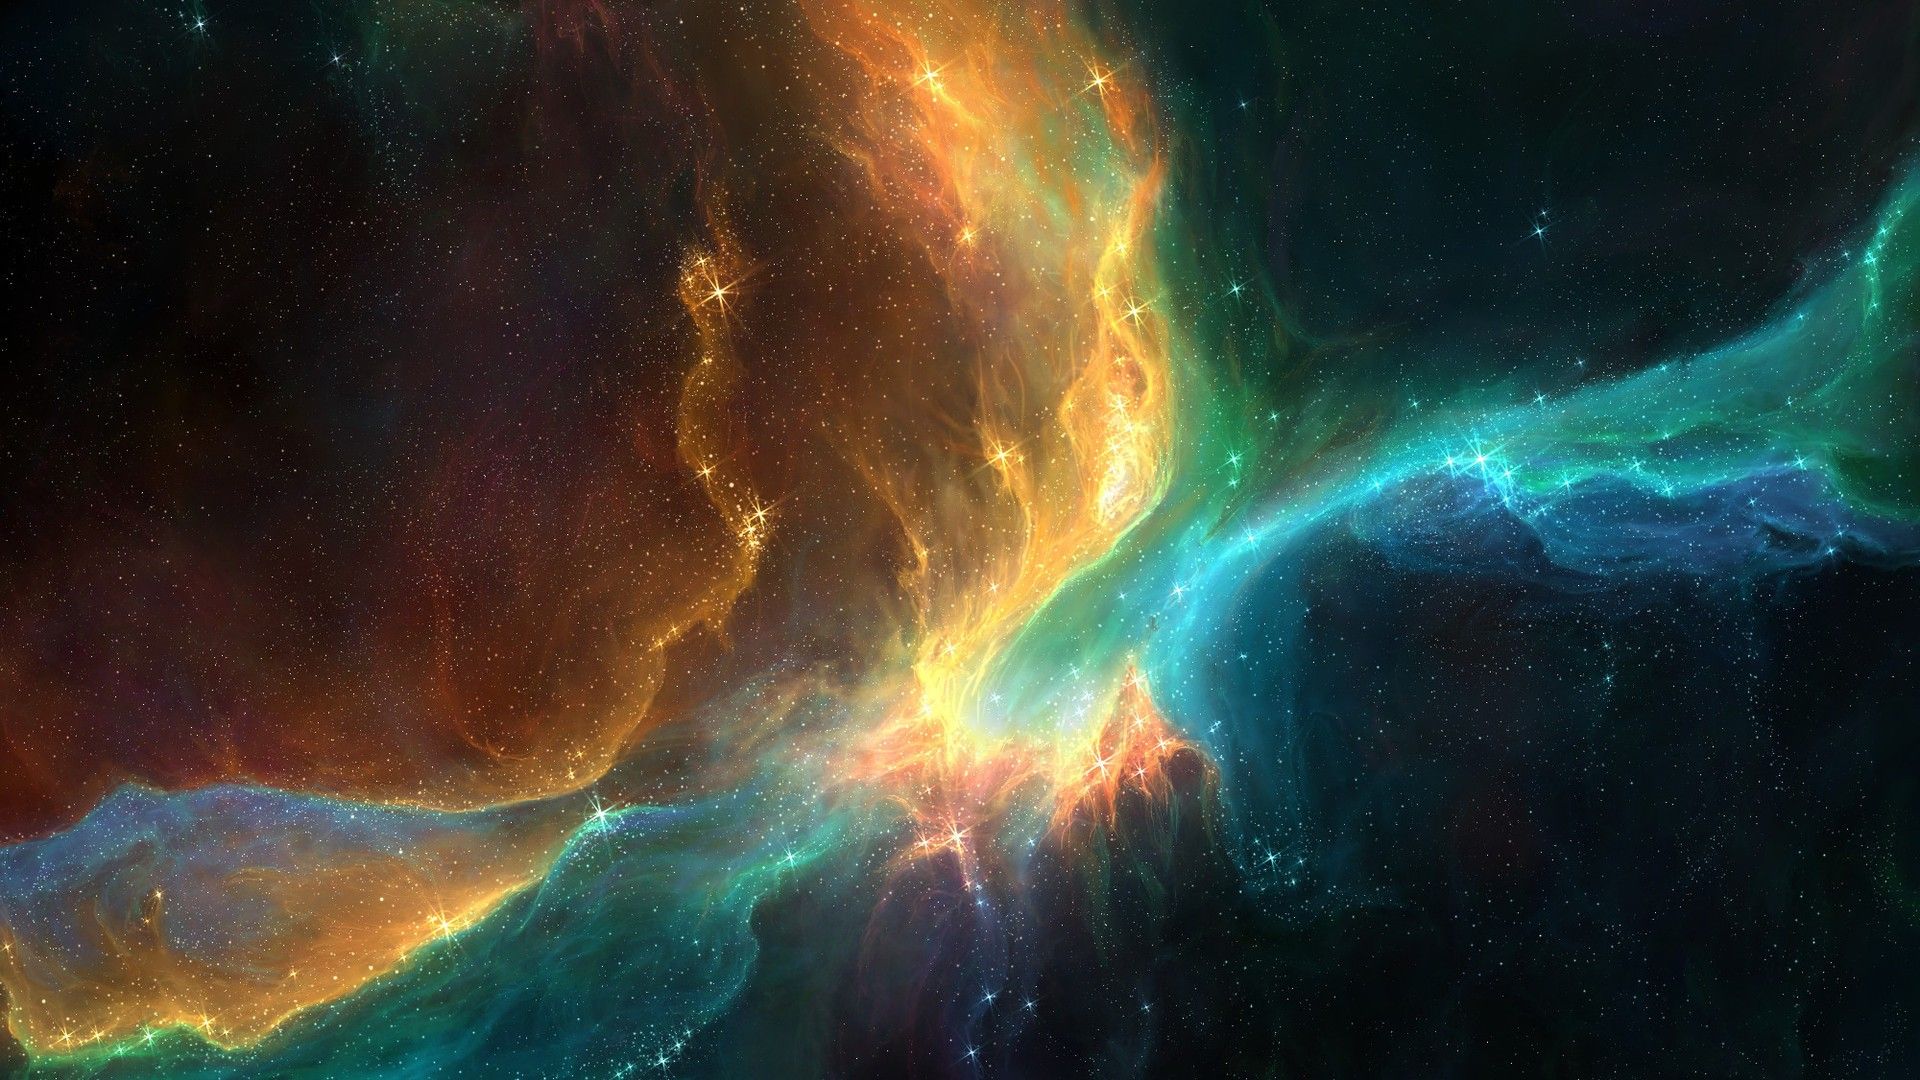 Outer Space Nebula Wallpaper Widescreen 2 HD Wallpapers